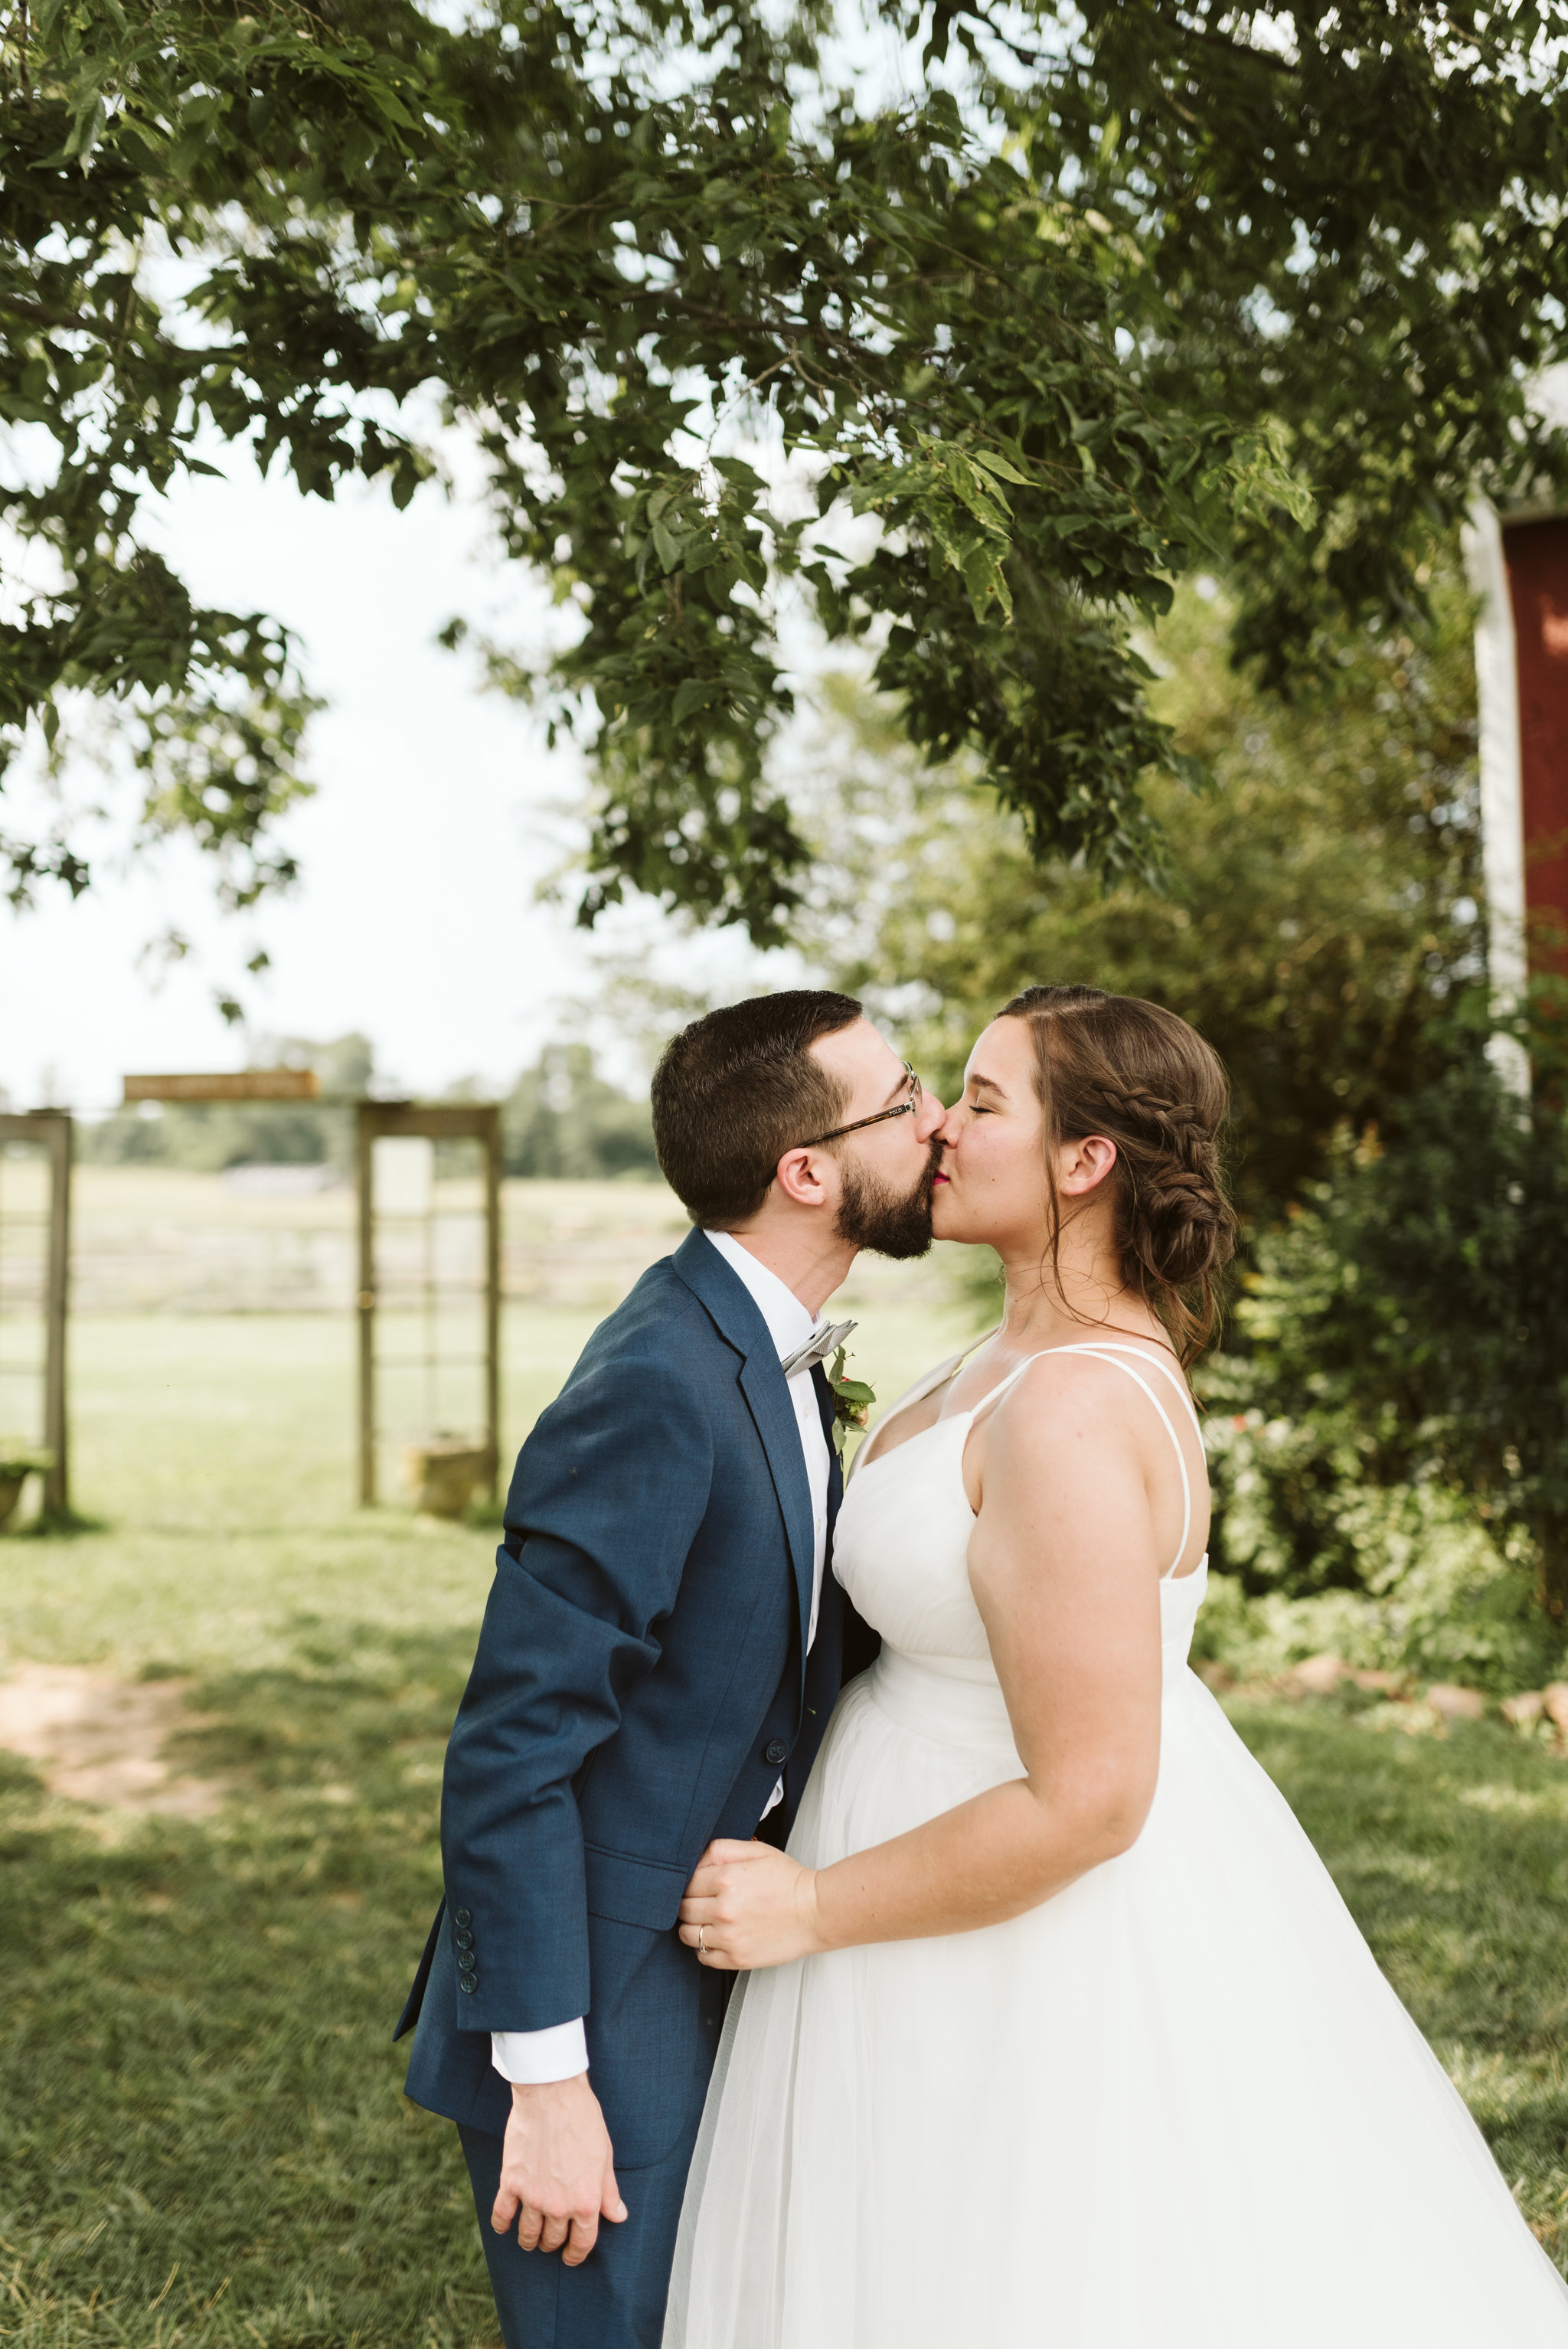 Rocklands Farm, Maryland, Intimate Wedding, Baltimore Wedding Photographer, Sungold Flower Co, Rustic, Romantic, Barn Wedding, Sweet Photo of Bride and Groom Kissing Outside